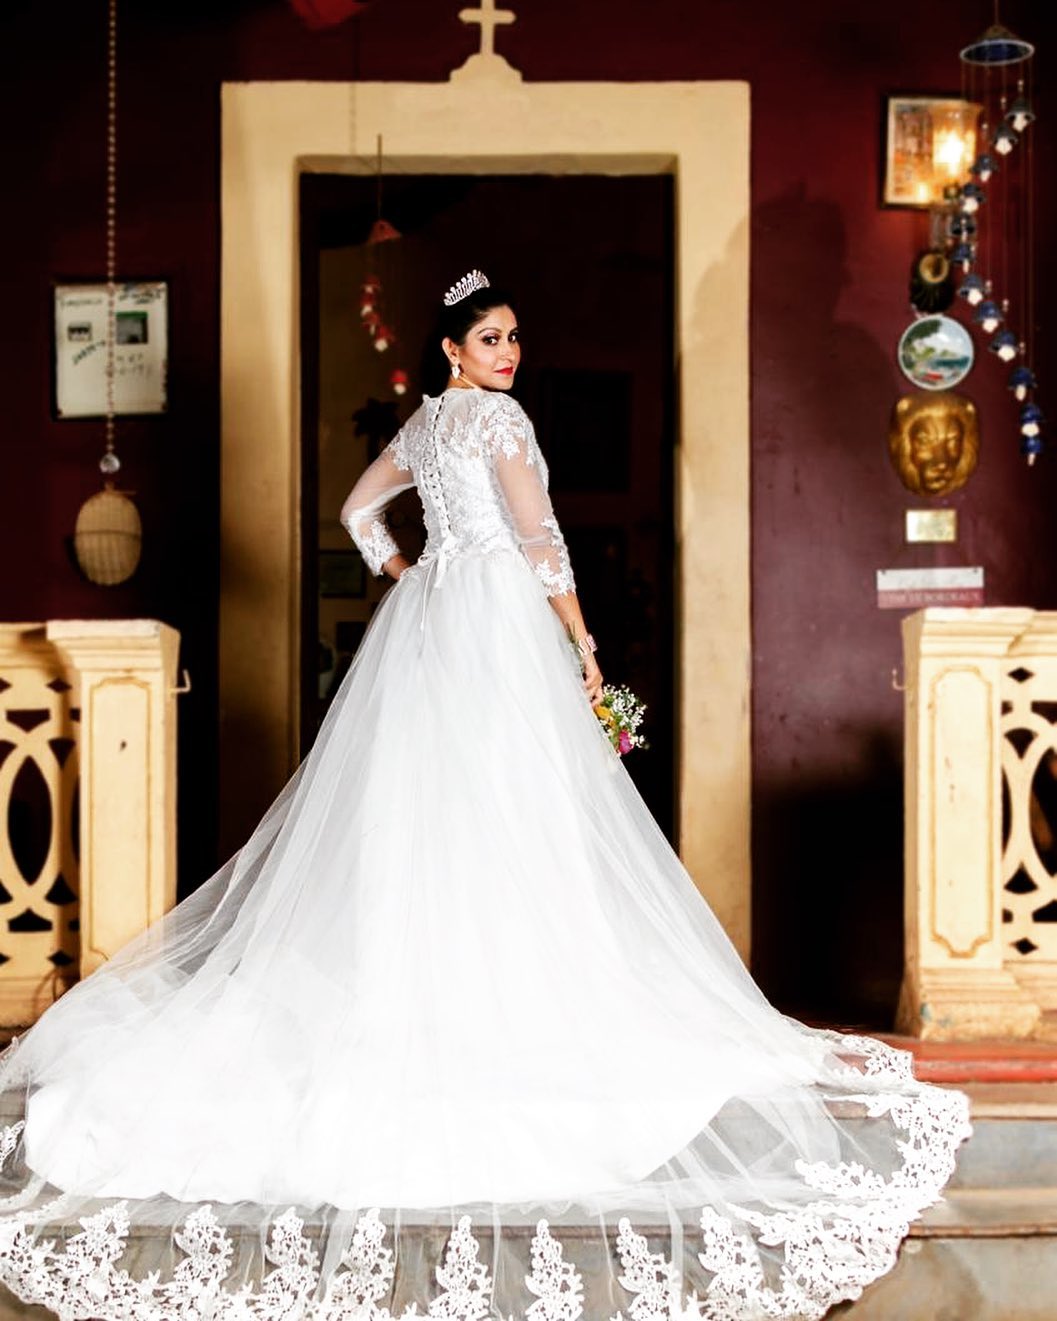 Beautiful gowns spotted on Indian Christian brides - Get Inspiring Ideas  for Planning Your Perfect Wedding at fabweddings